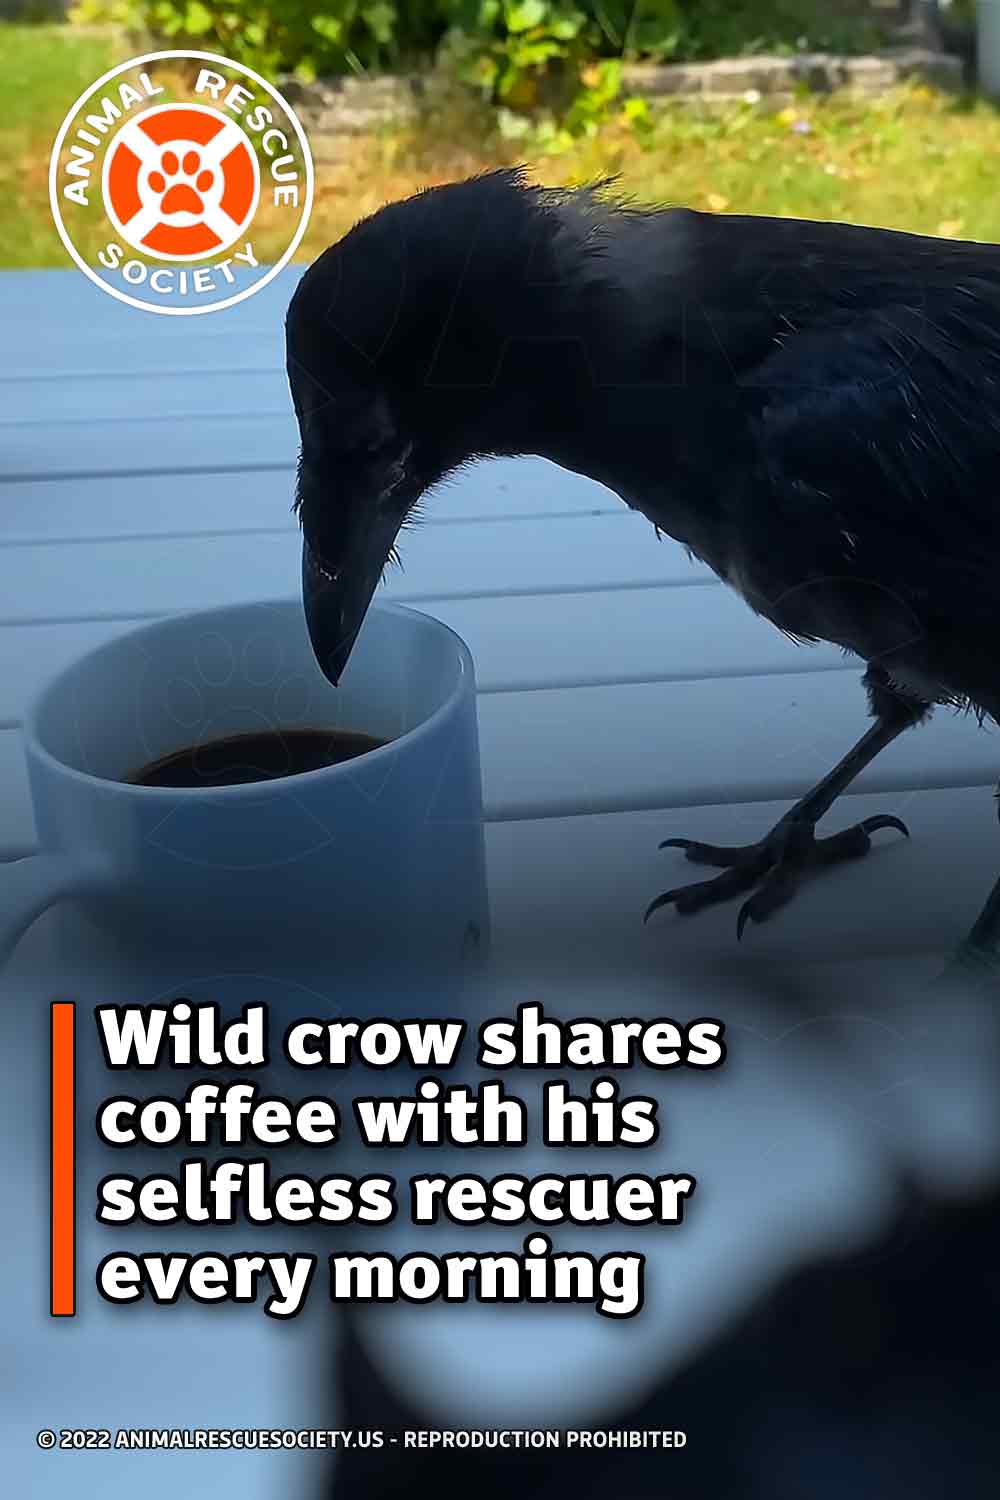 Wild crow shares coffee with his selfless rescuer every morning